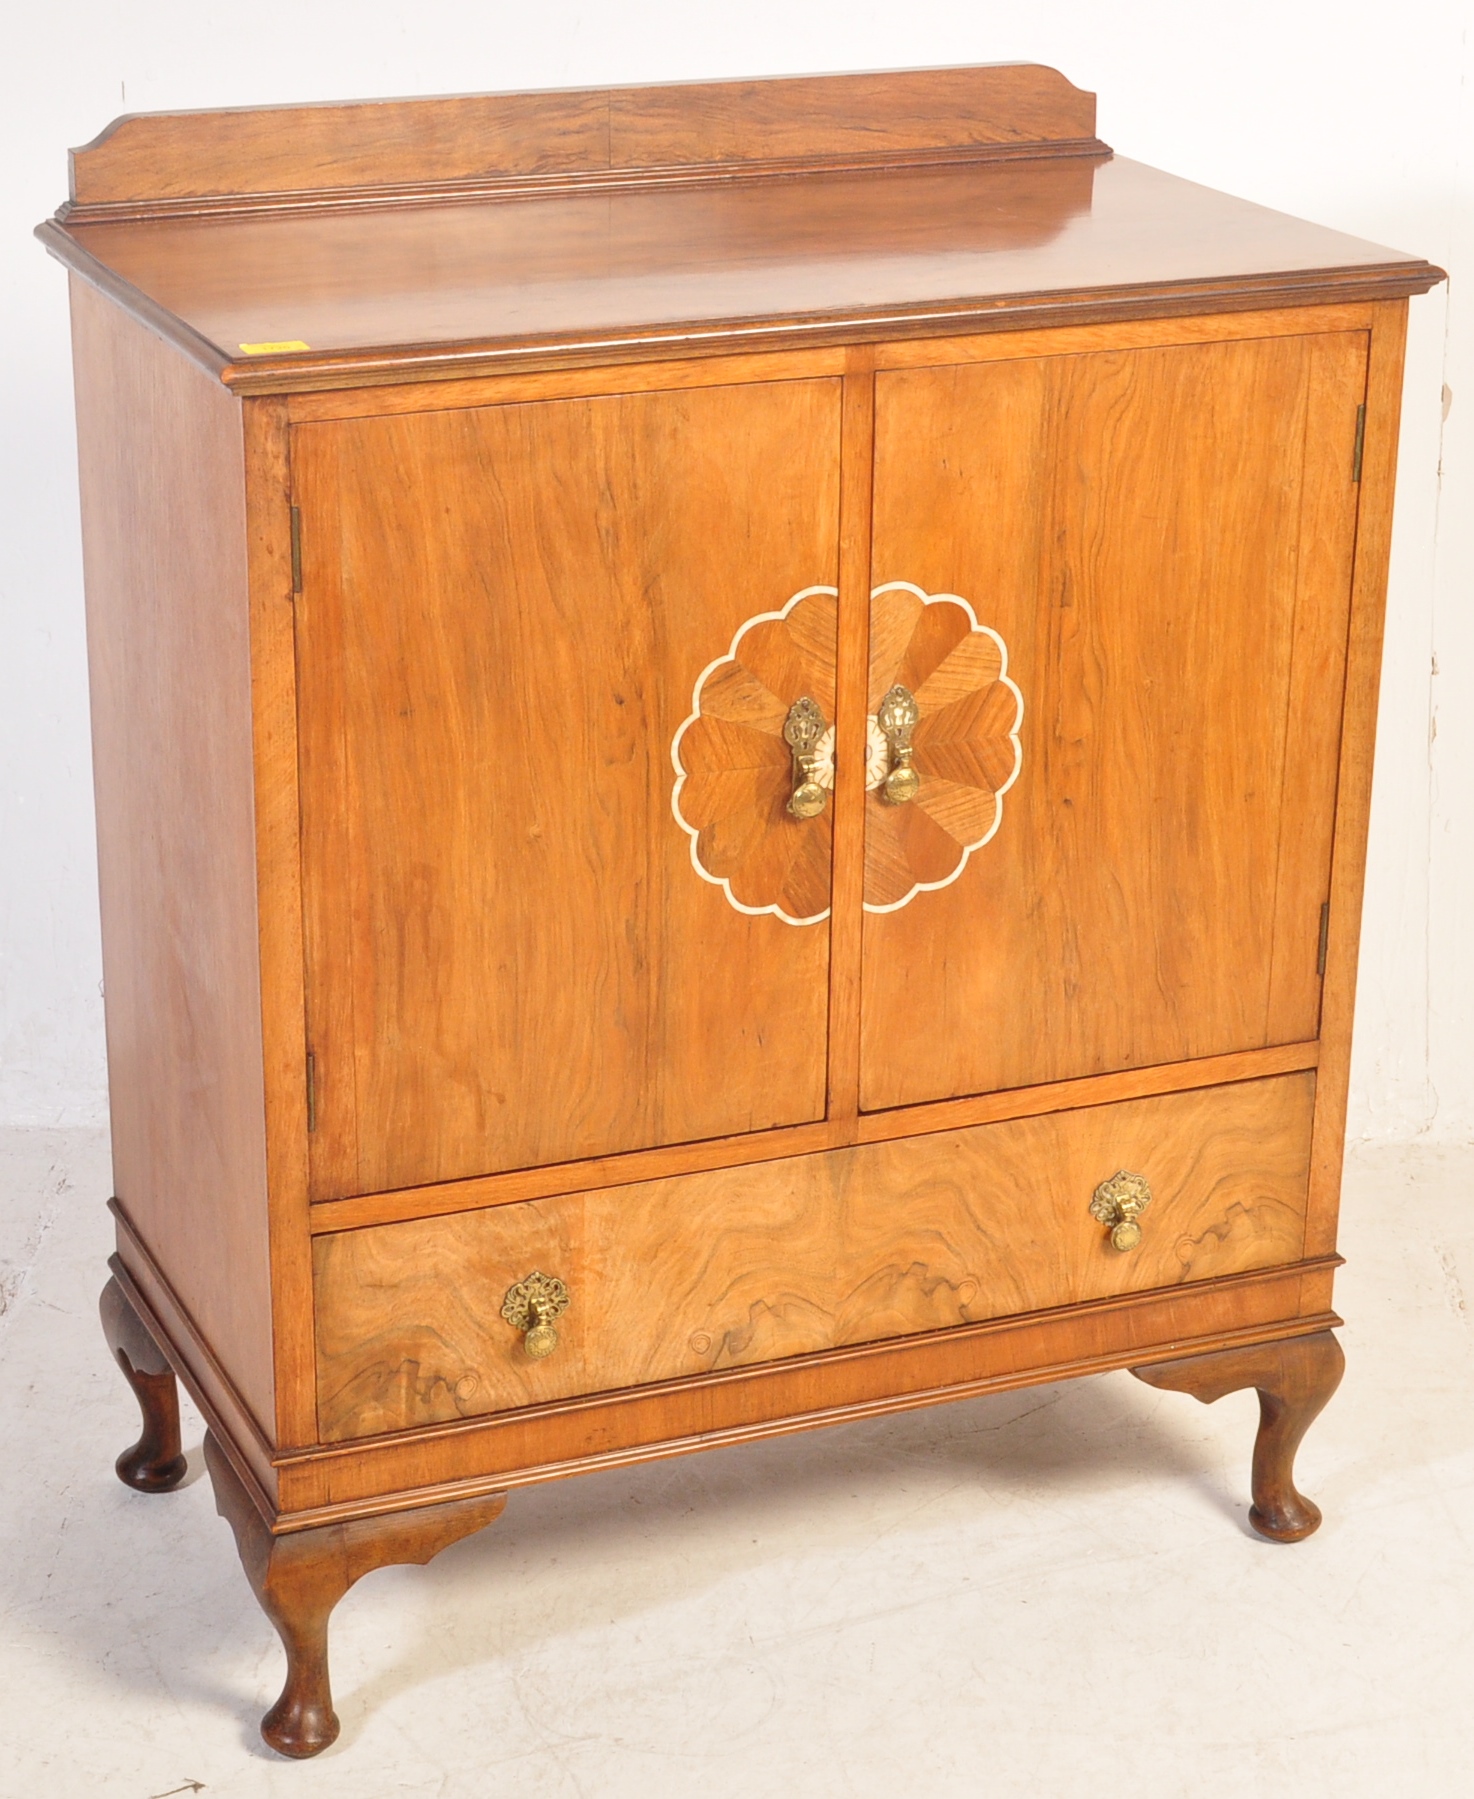 ART DECO 1930S WALNUT TALLBOY CHEST OF DRAWERS - Image 2 of 9